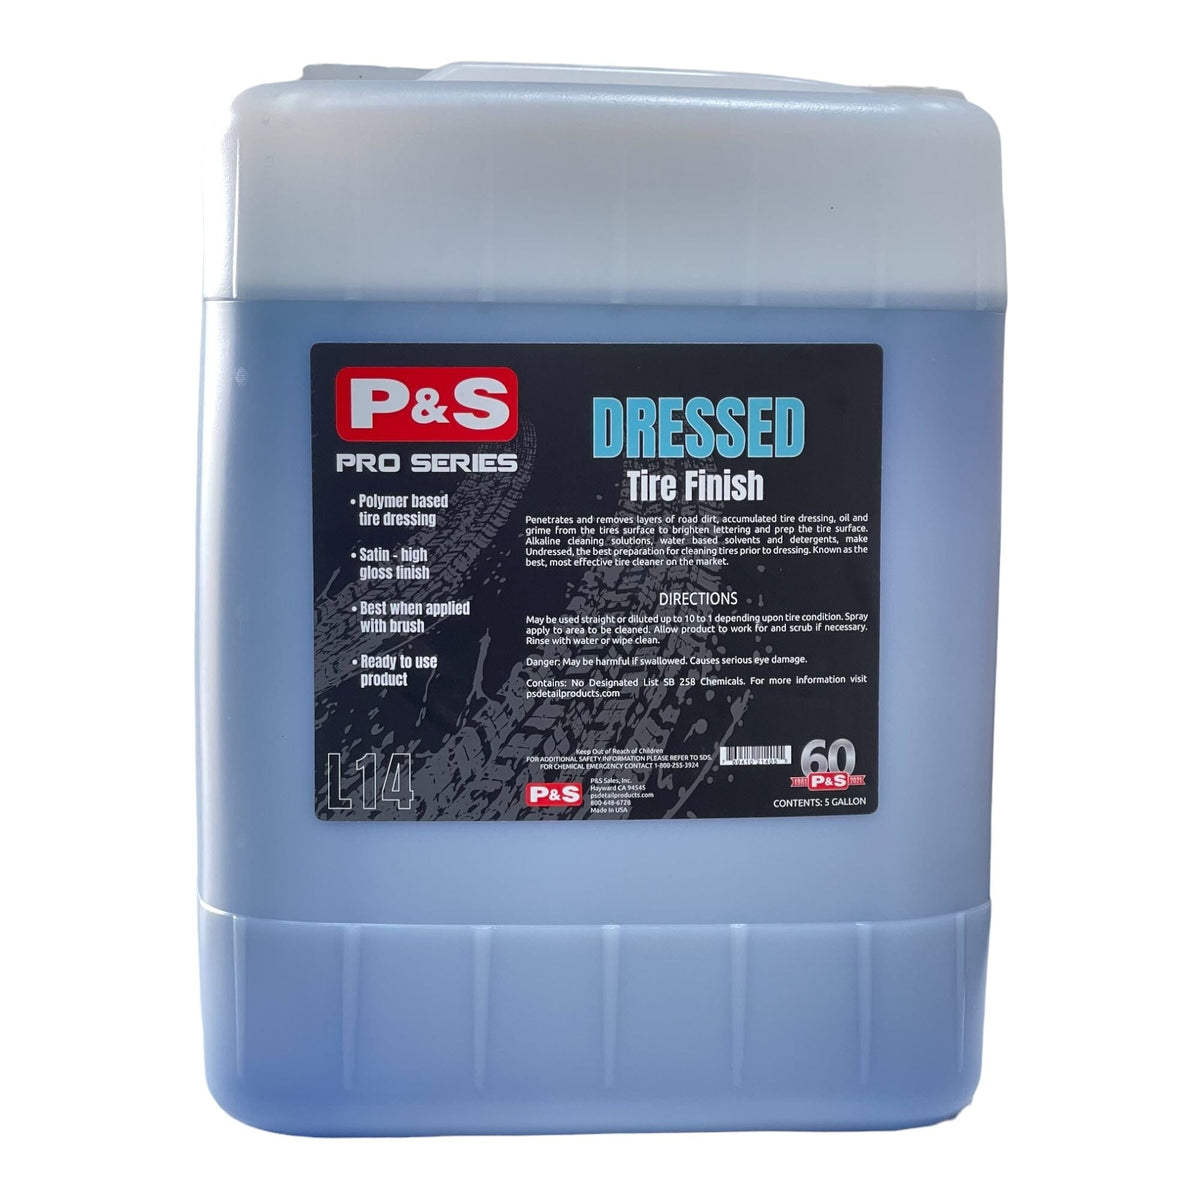 P&S Sales, Inc. (@psdetailproducts) • Instagram photos and videos